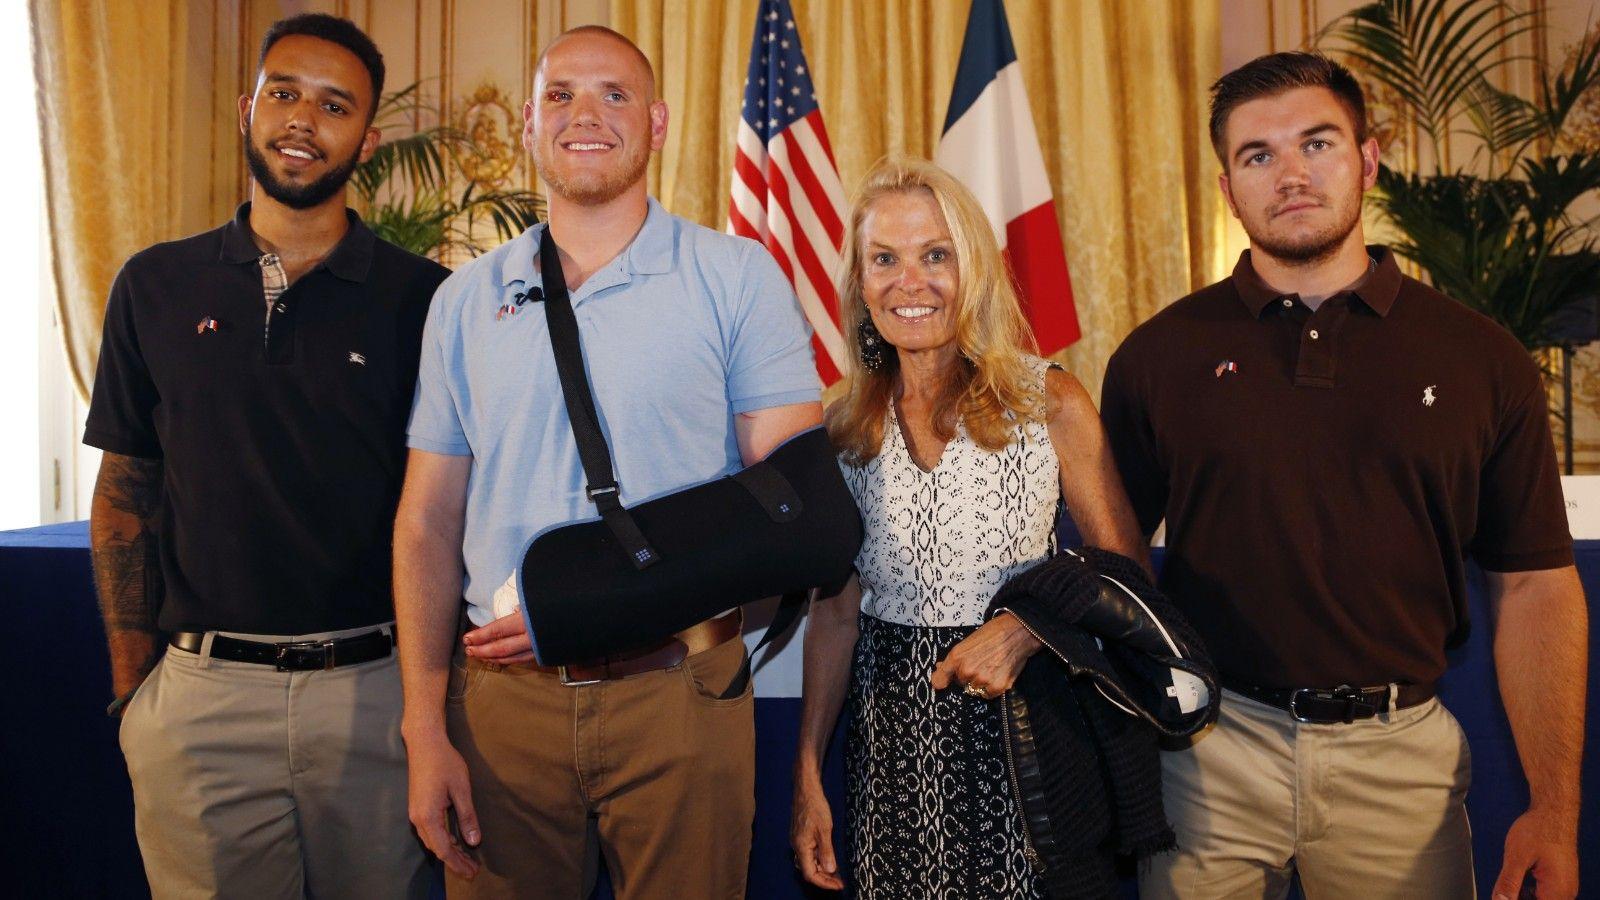 Clint Eastwood casts Paris train heroes as themselves in new film